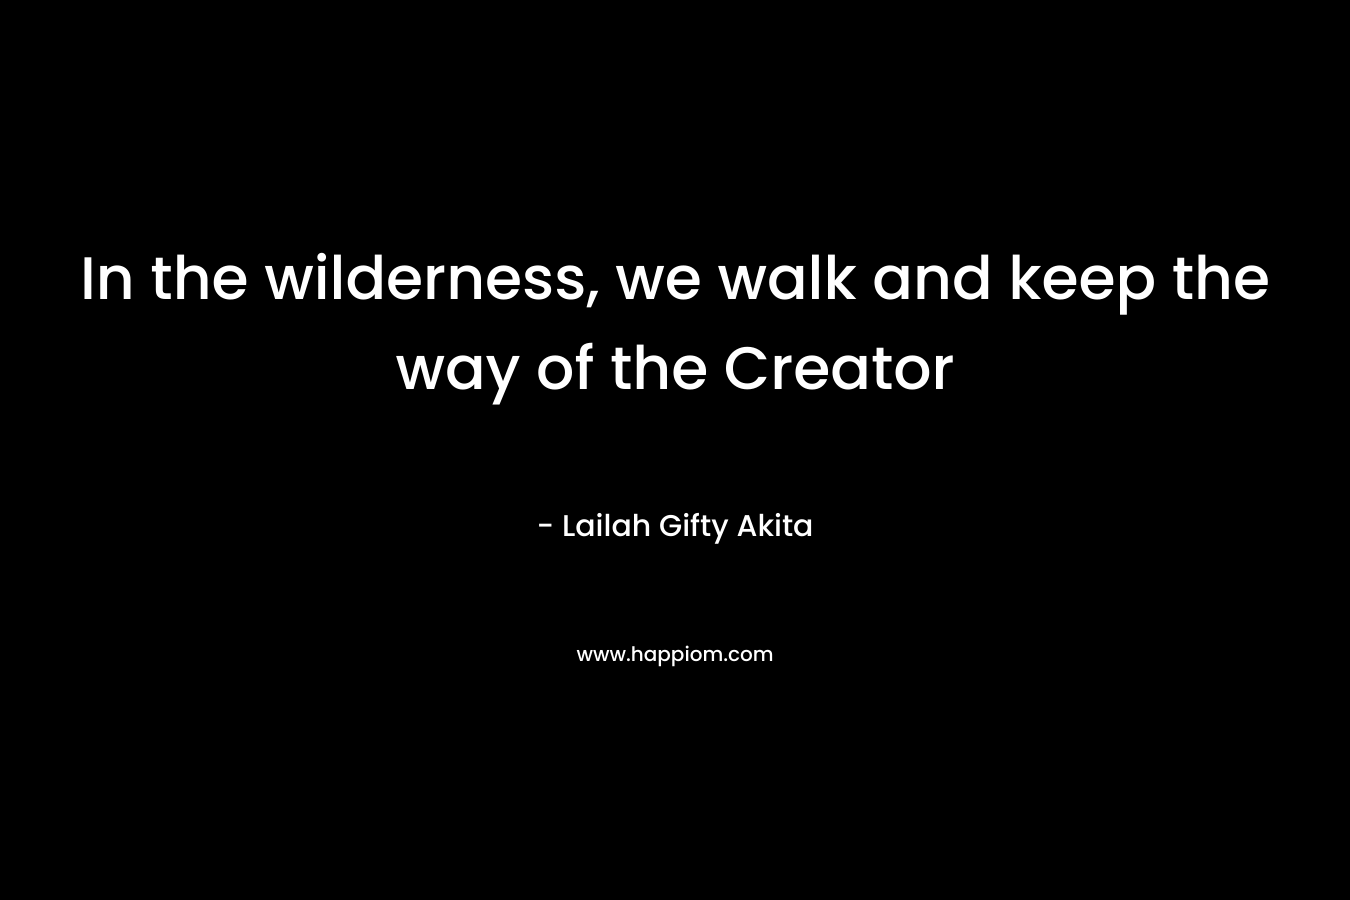 In the wilderness, we walk and keep the way of the Creator